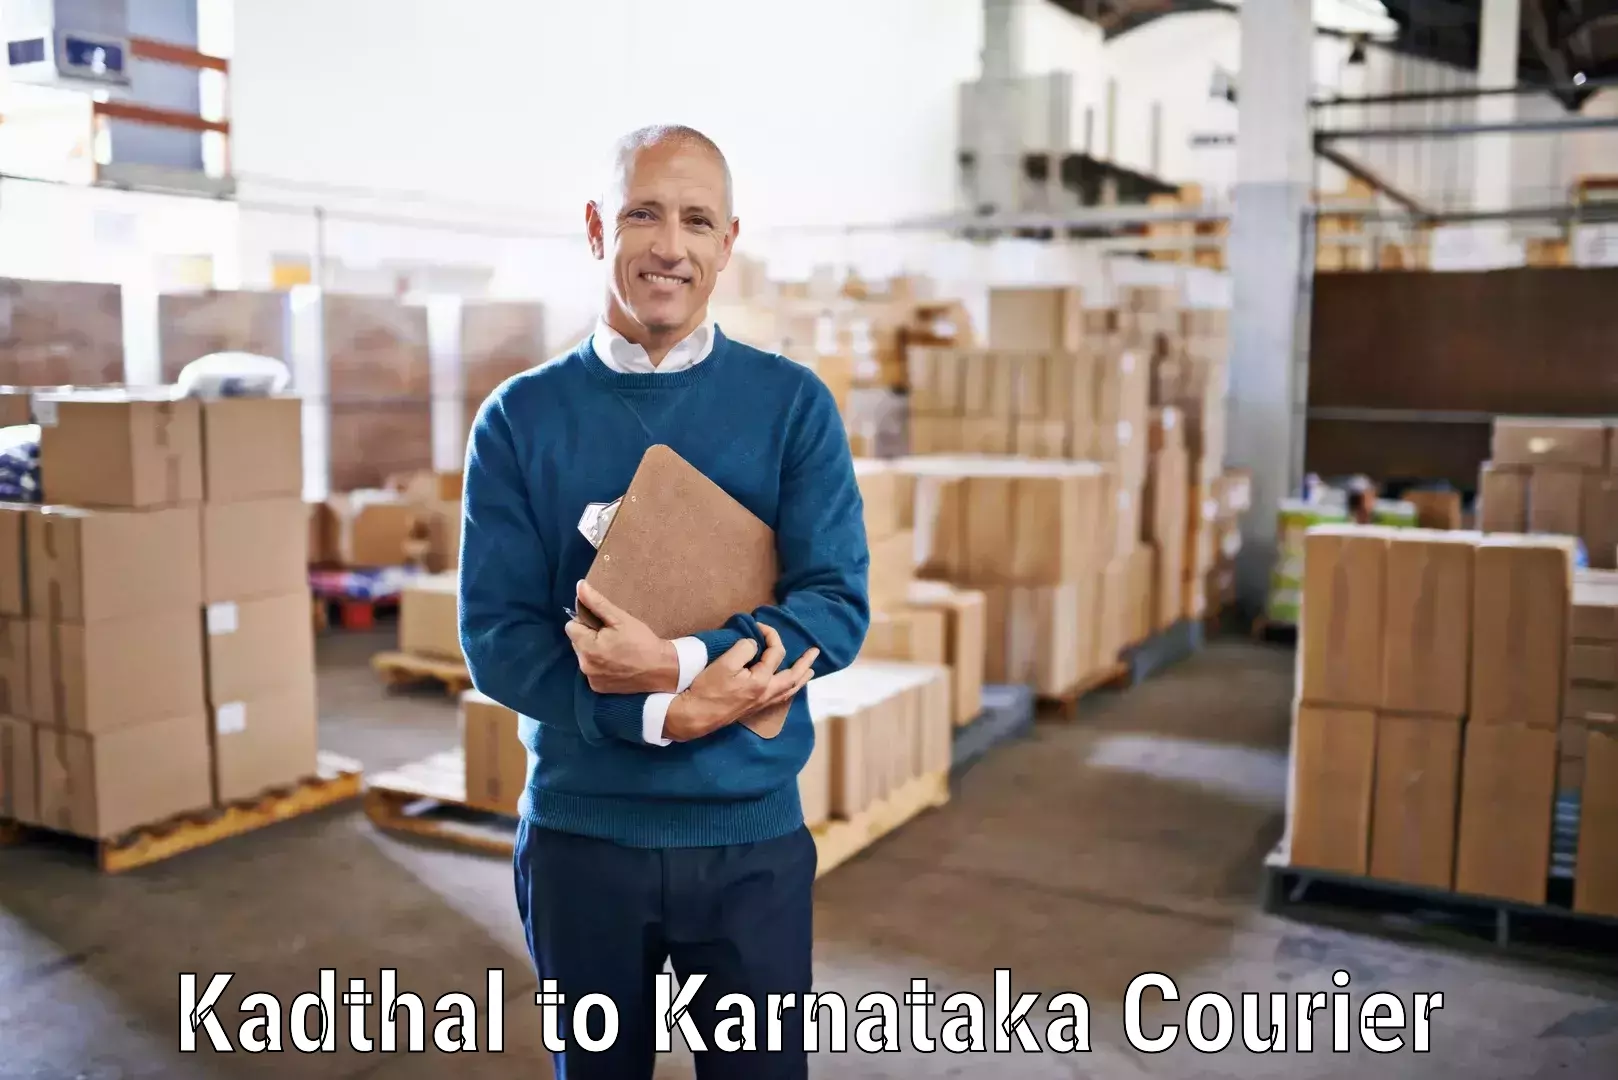 Reliable courier service Kadthal to Shorapur